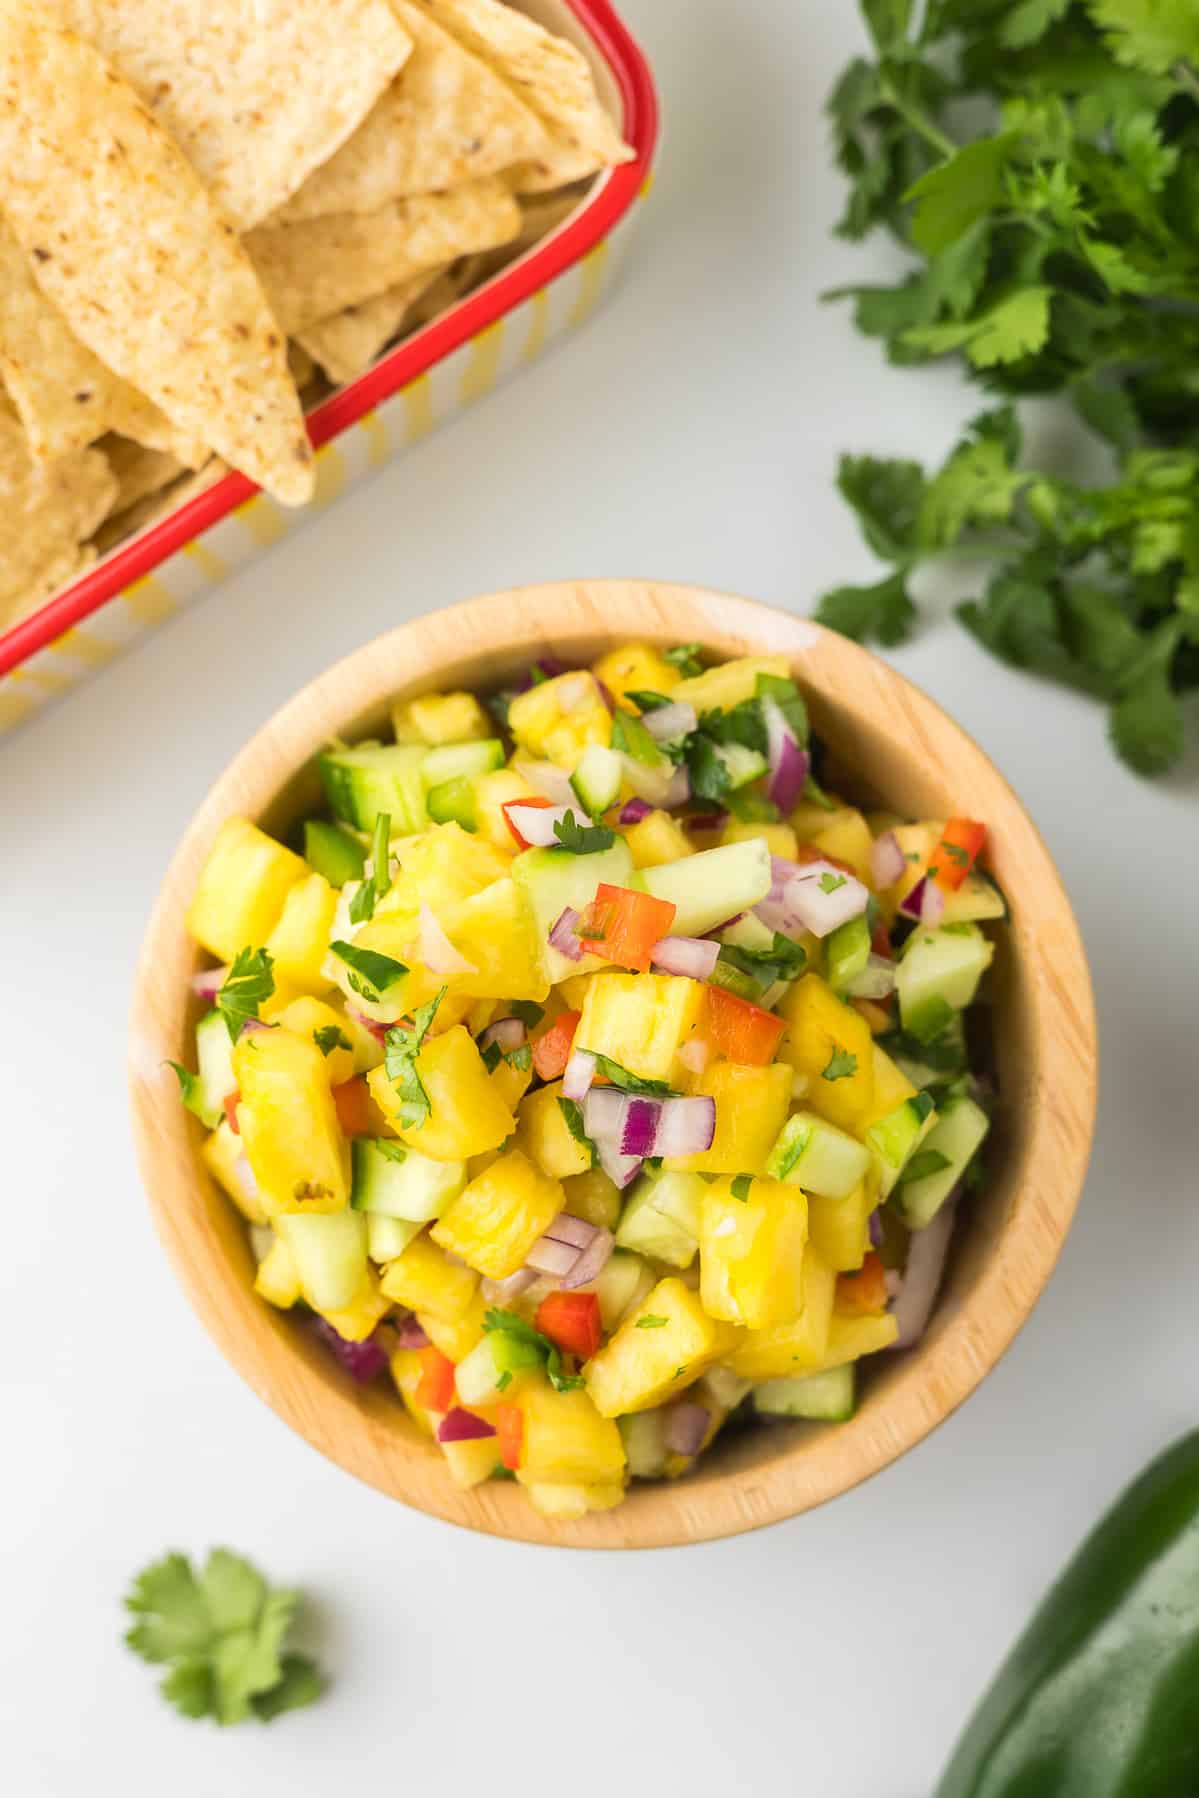 Jalapeno Pineapple Salsa in a wooden bowl with chips and cilantro.